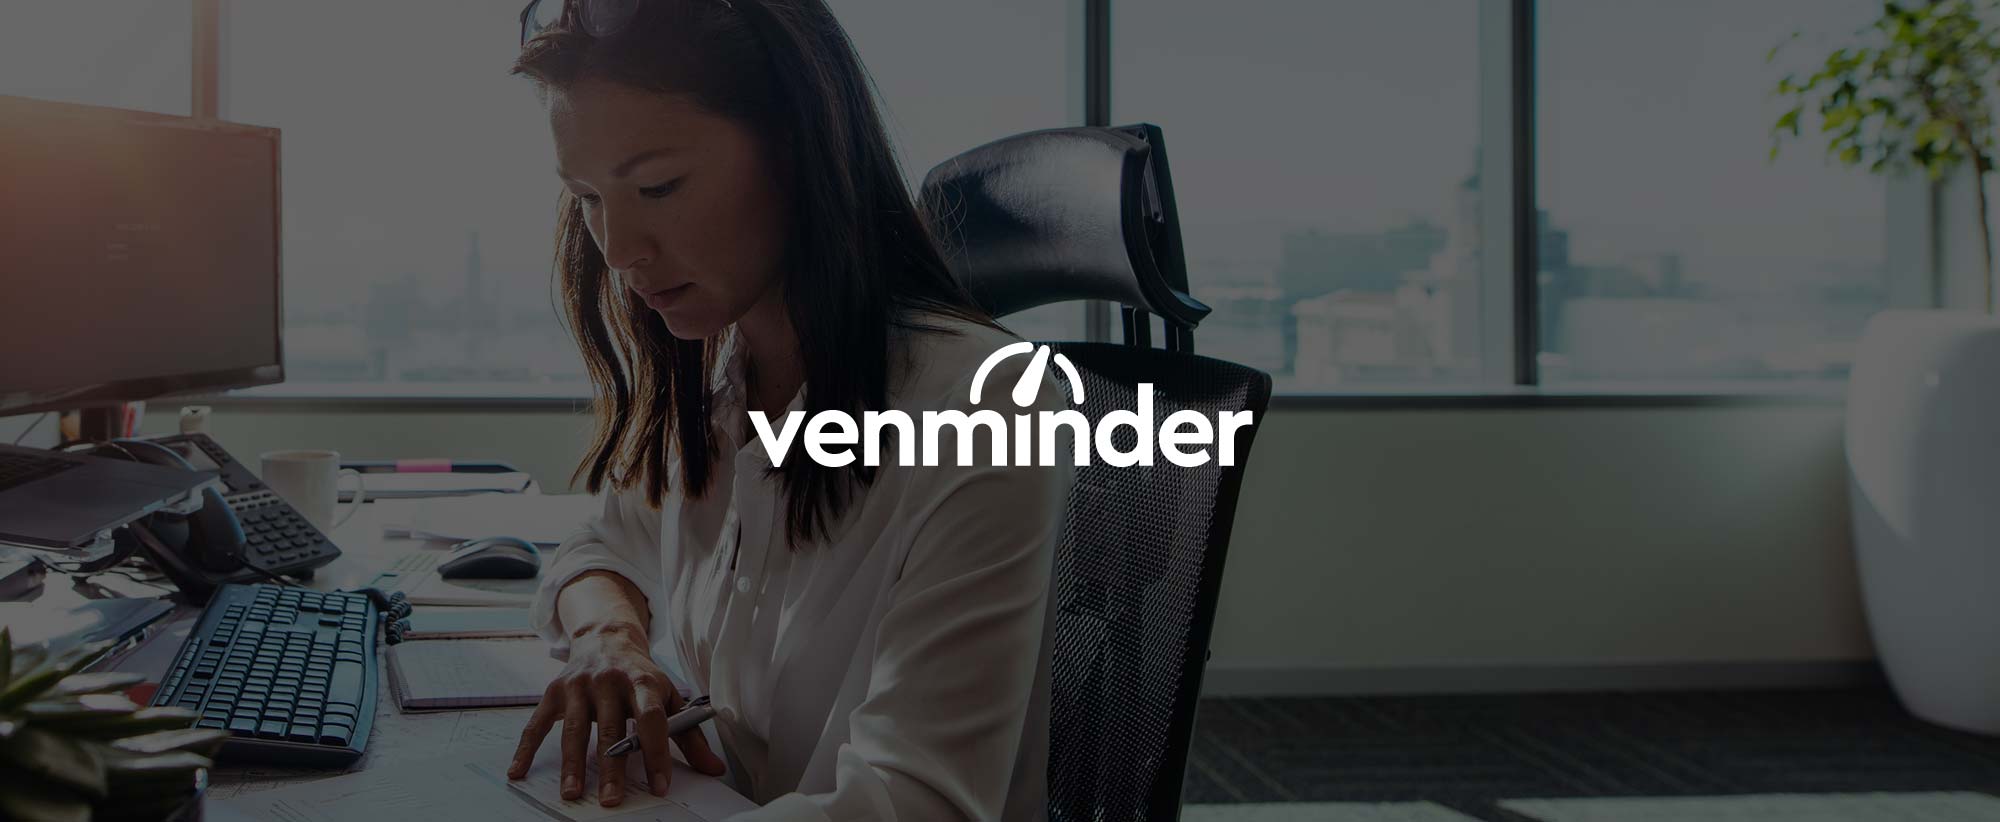 Venminder feature image